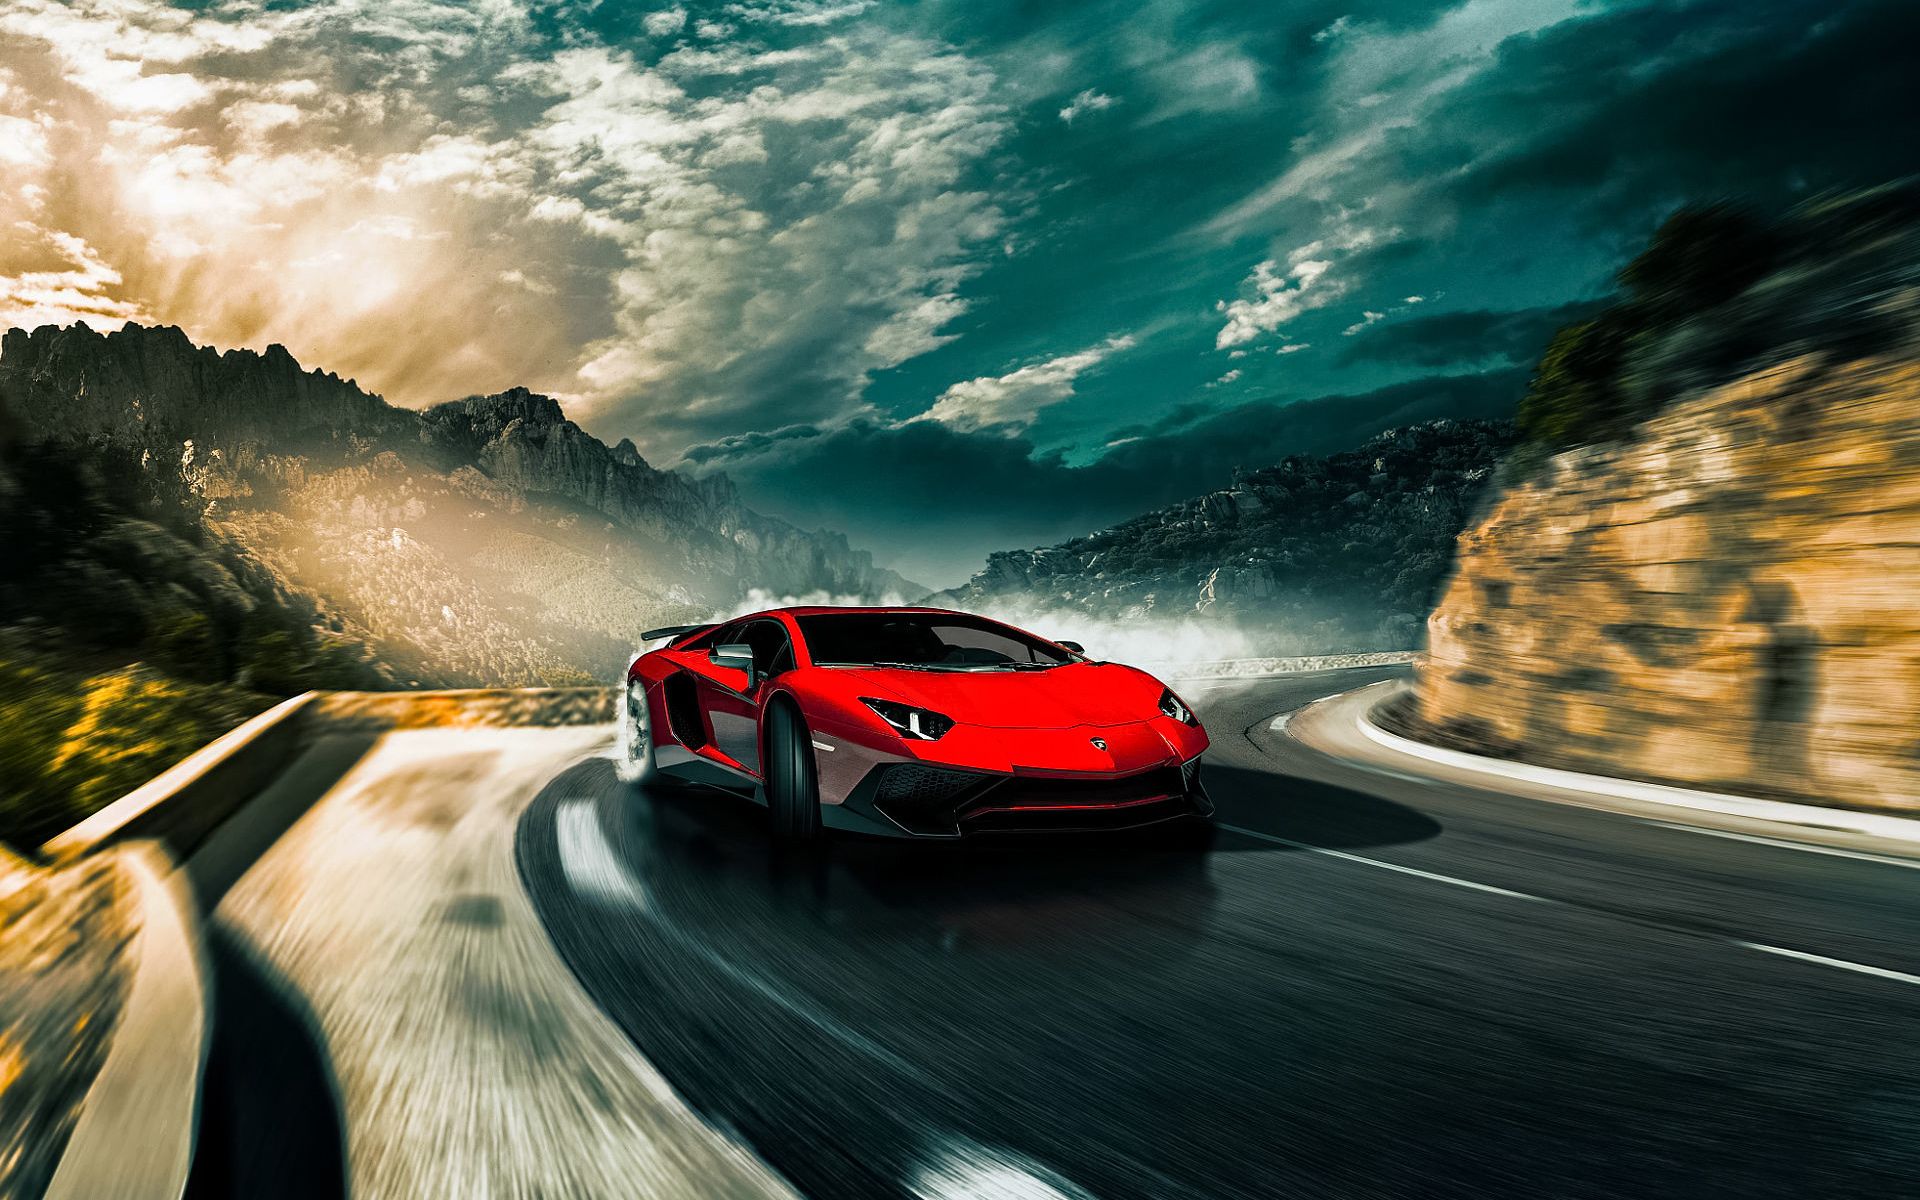 Lp750 4K wallpaper for your desktop or mobile screen free and easy to download